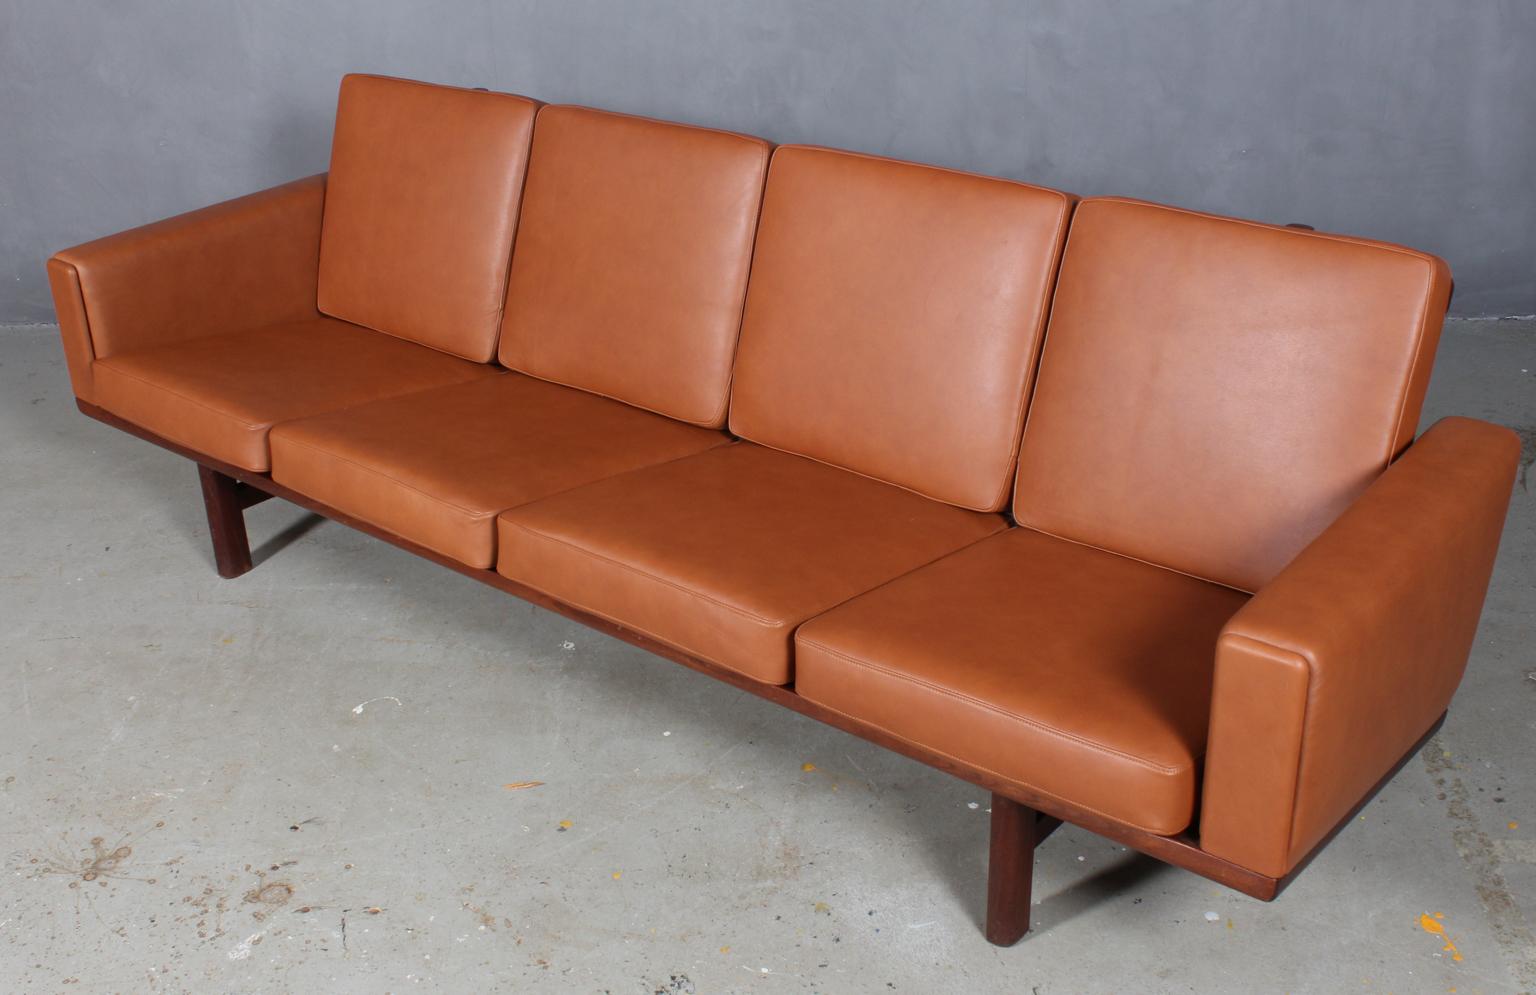 Hans J. Wegner four-seat sofa new upholstered with pure tan aniline leather.
Original Epeda cushions.

Frame in solid teak.

Model 236/4, produced by GETAMA.